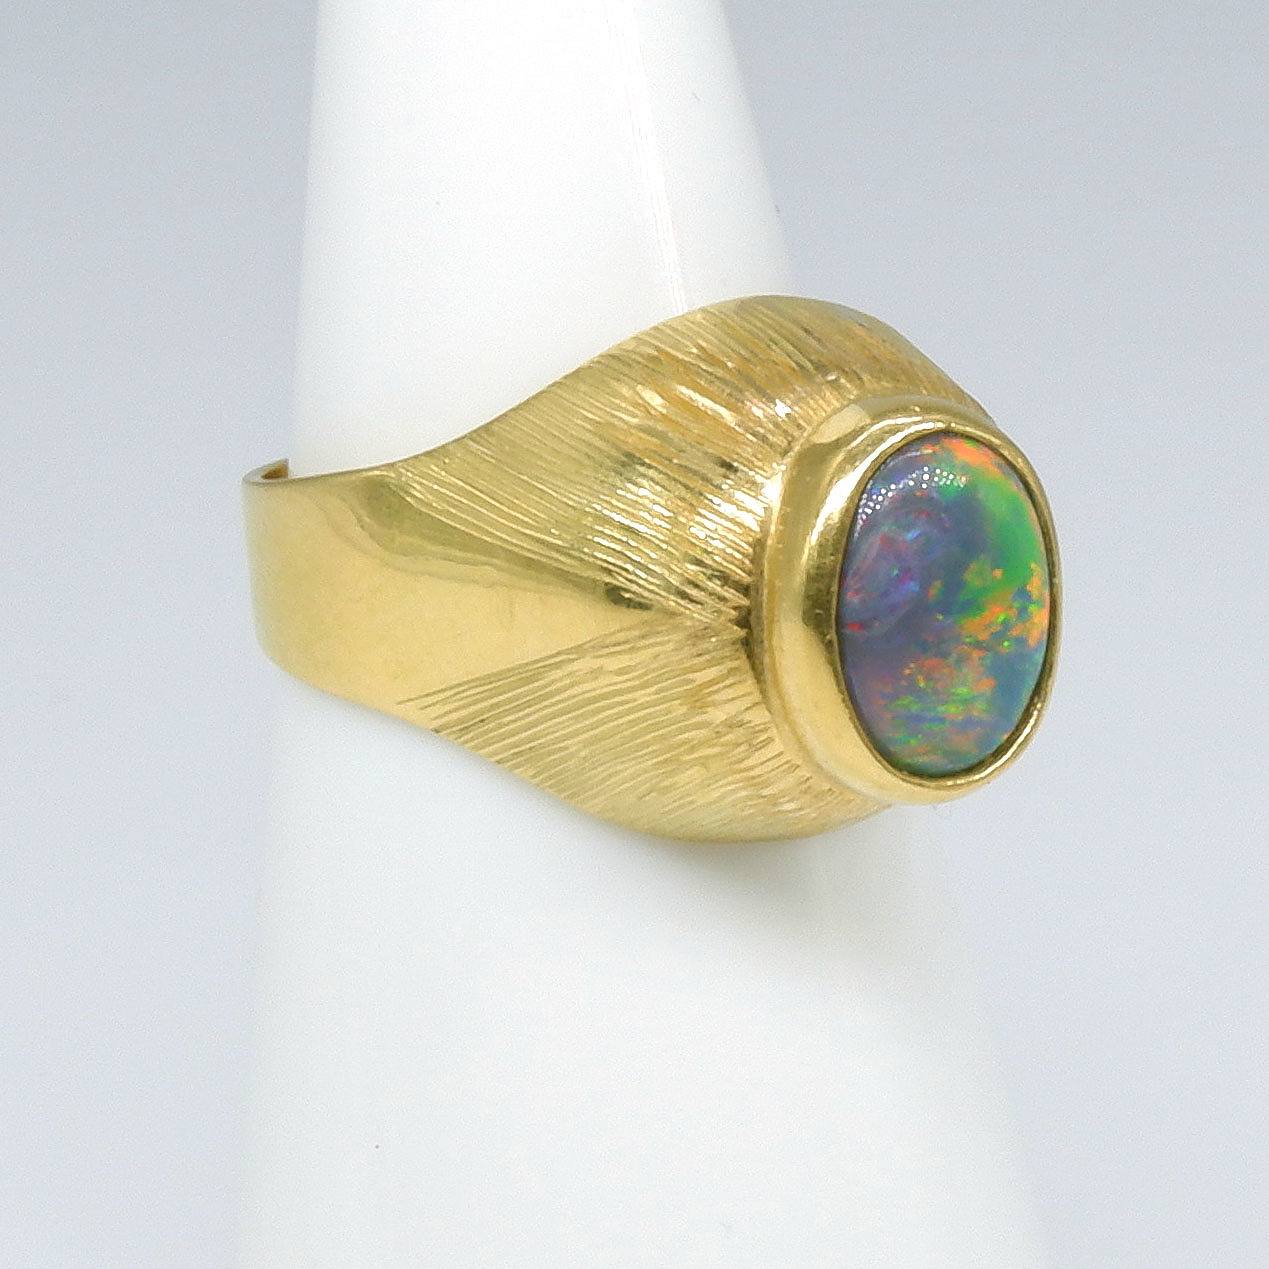 '18ct Yellow Gold High Set Solid Oval Opal Ring'